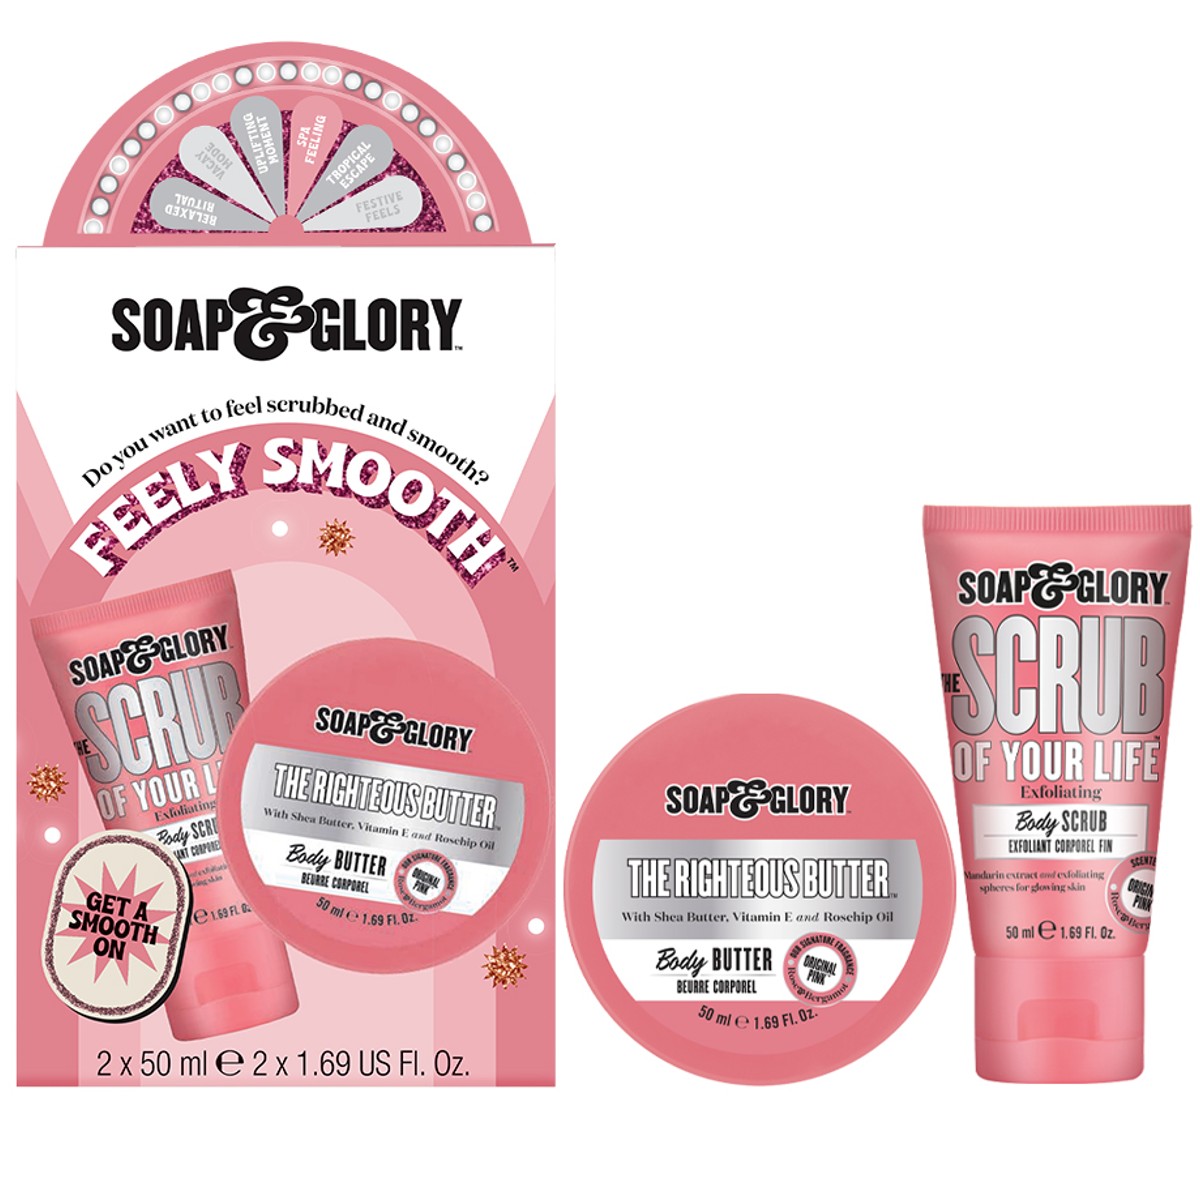 Soap and glory feely smooth christmas gift set